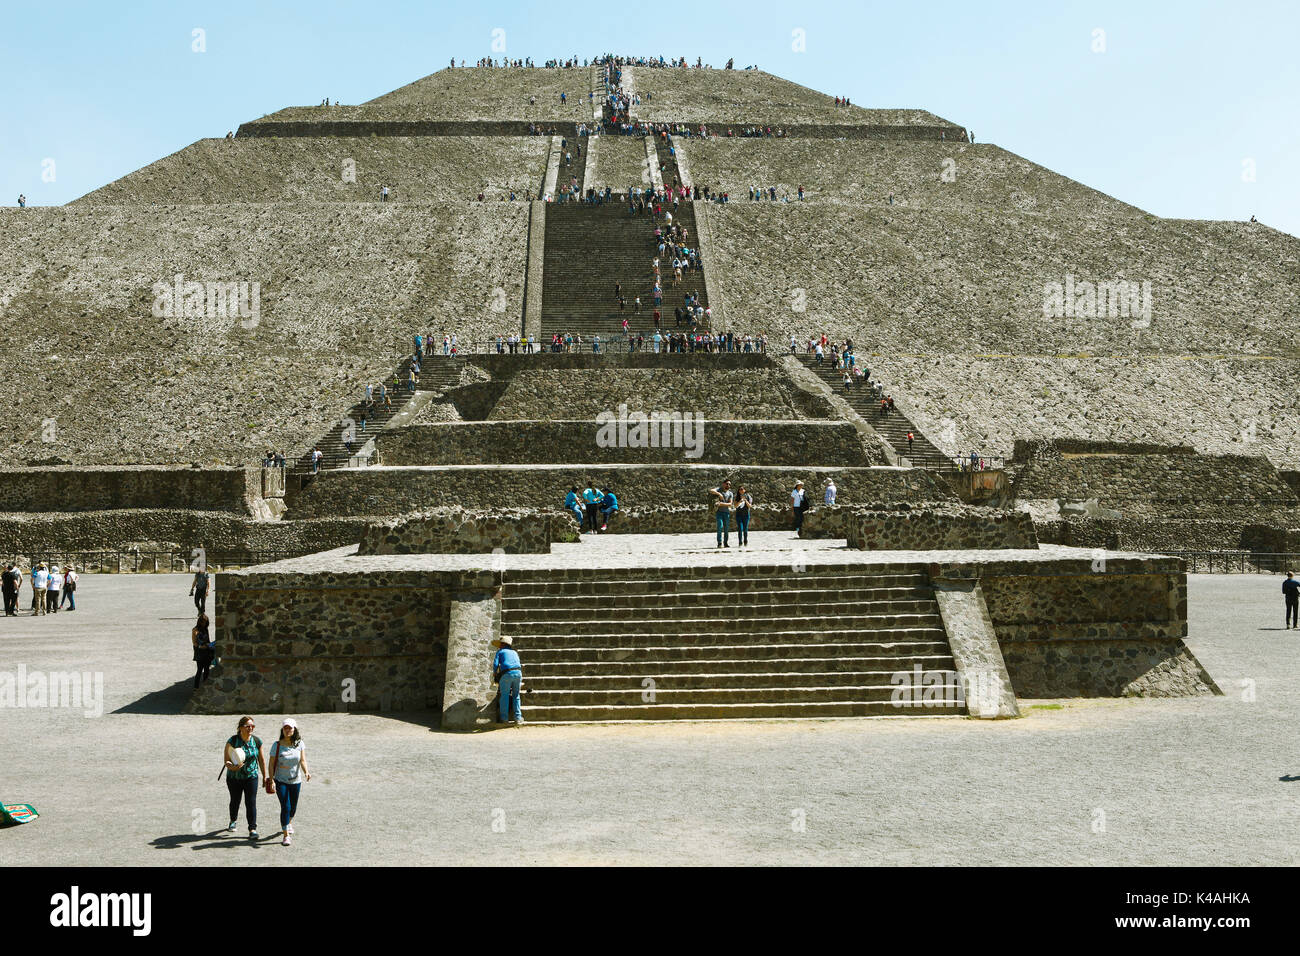 Pyramid of the Sun, Teotihuacán, federal state of Mexico, Mexico Stock Photo